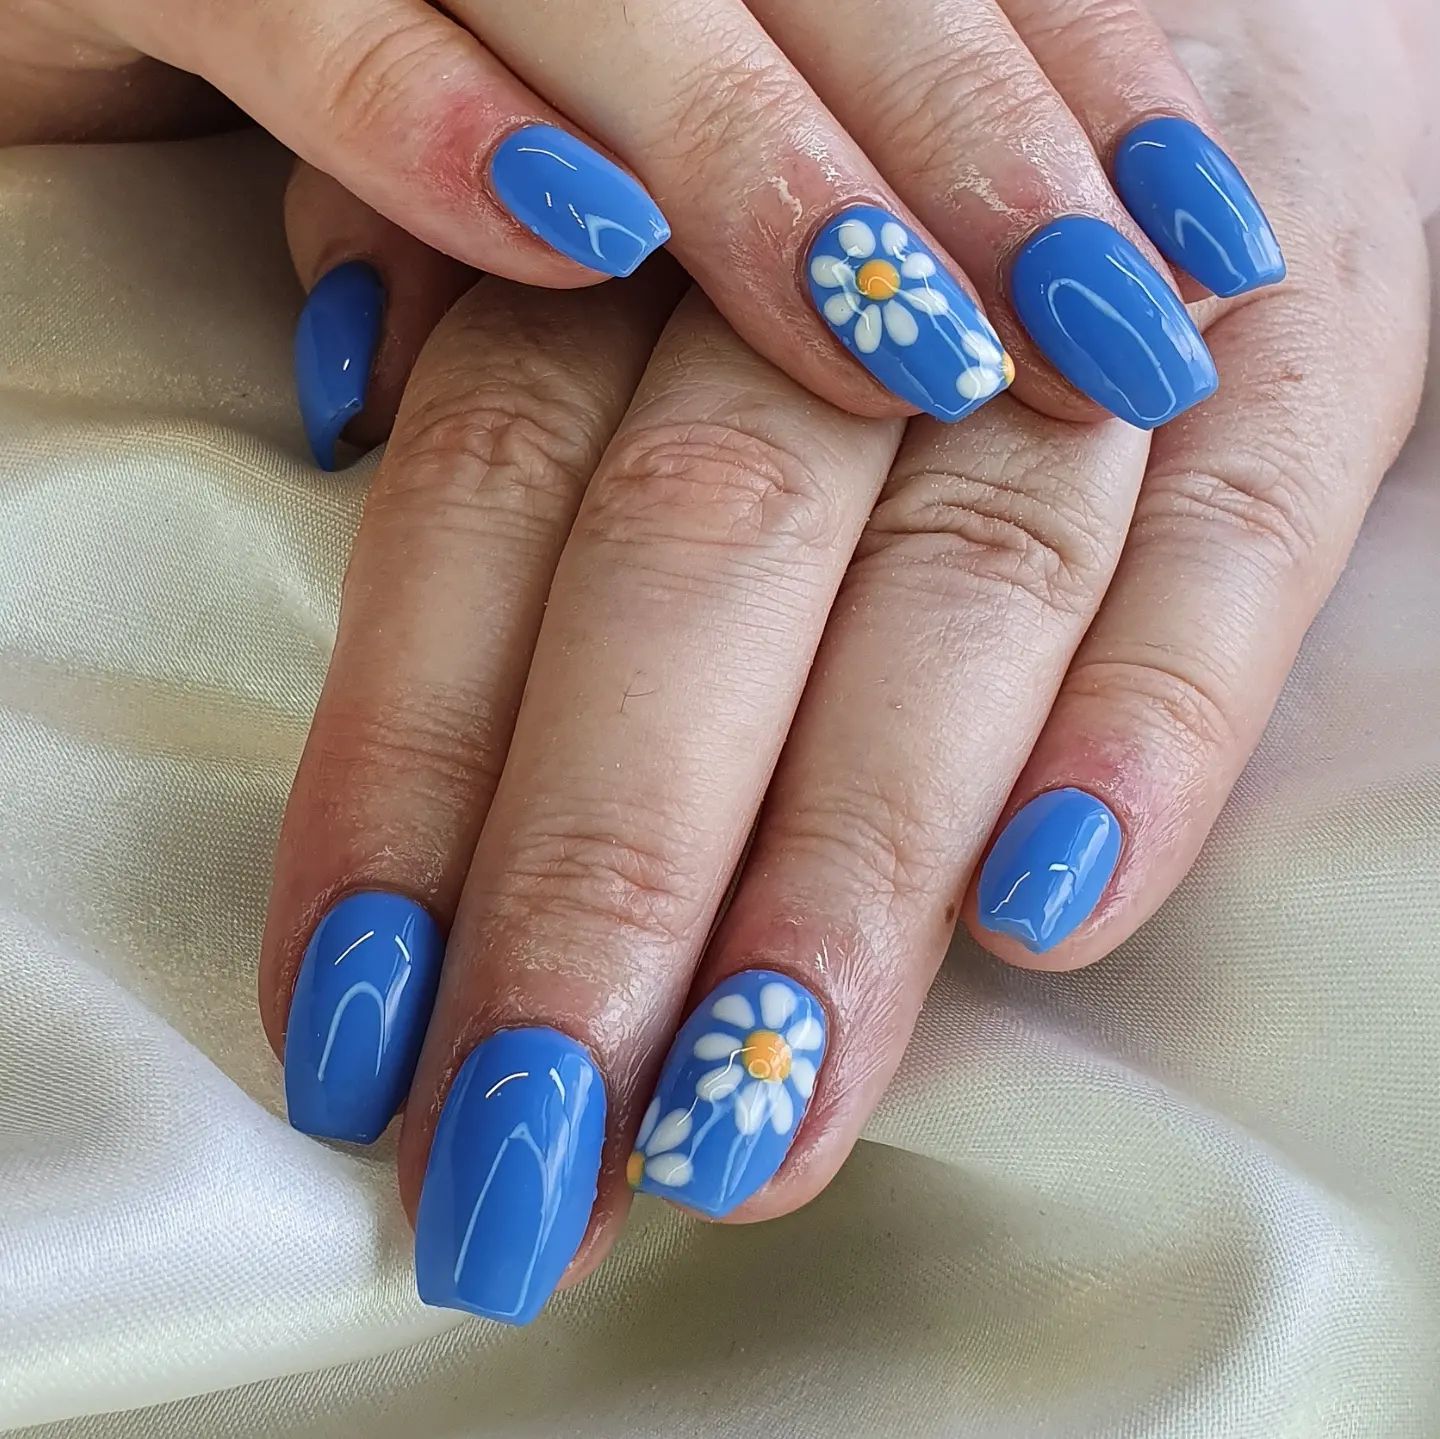 Looking at this shade of blue color is enough to calm you down, isn't it? To give a more positive vibe, add some daisies on your ring nails.